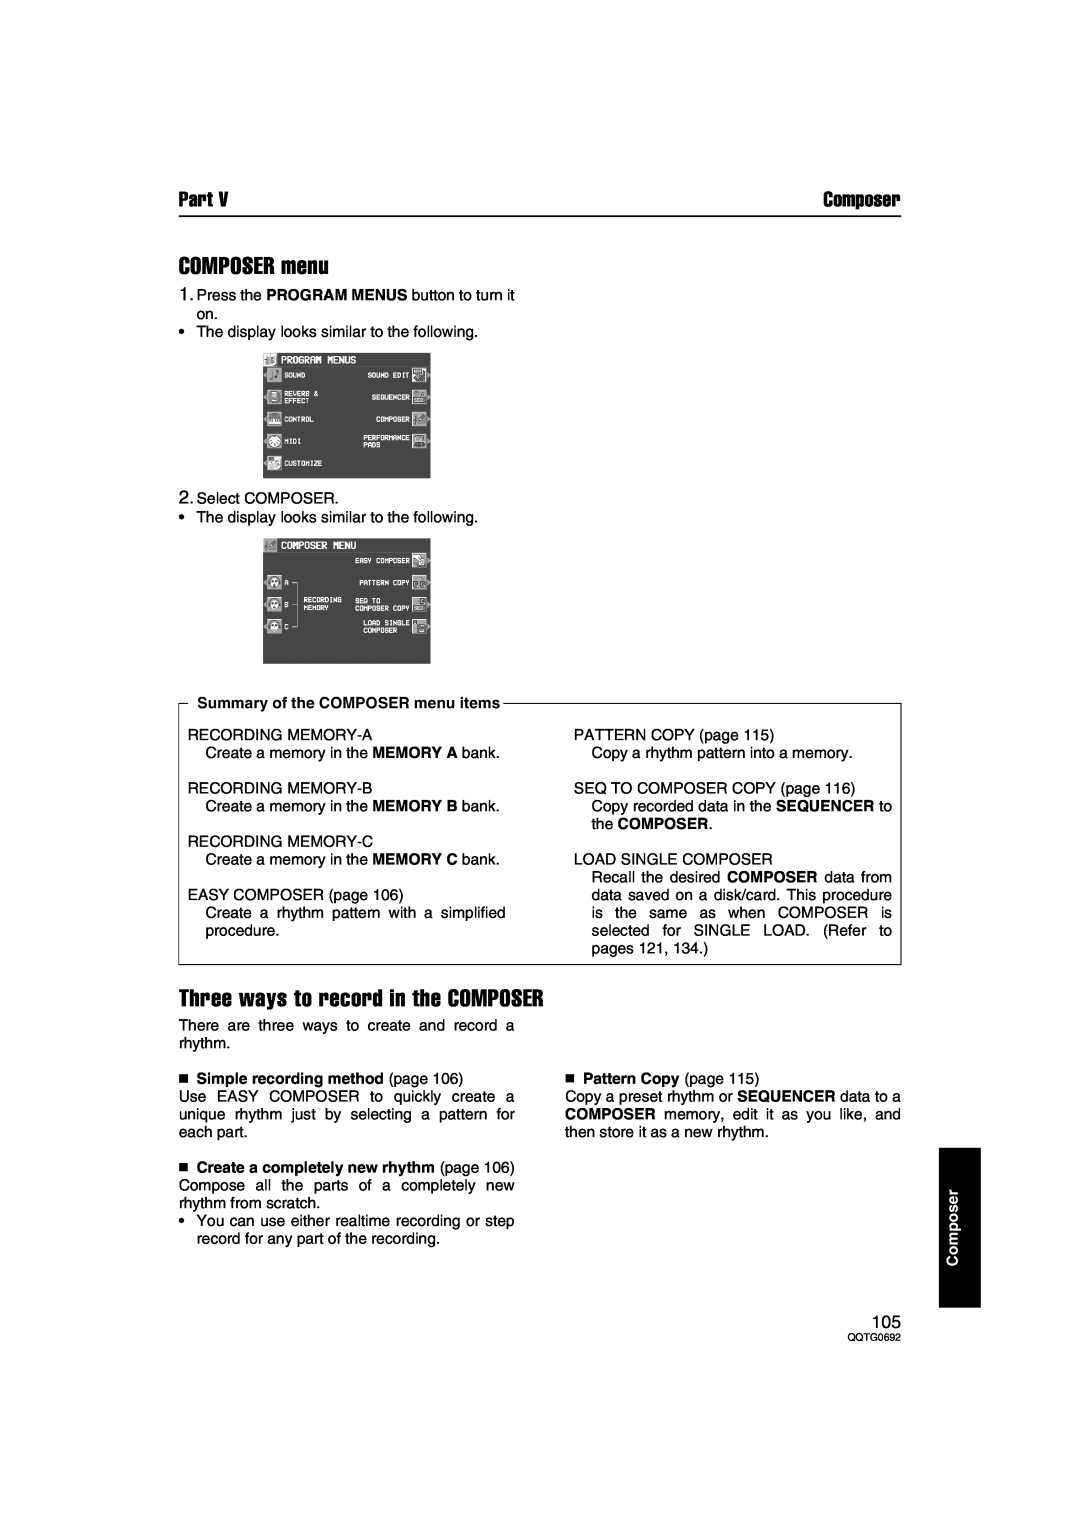 Panasonic SX-KN2400 manual Three ways to record in the COMPOSER, Composer, Summary of the COMPOSER menu items, Part 